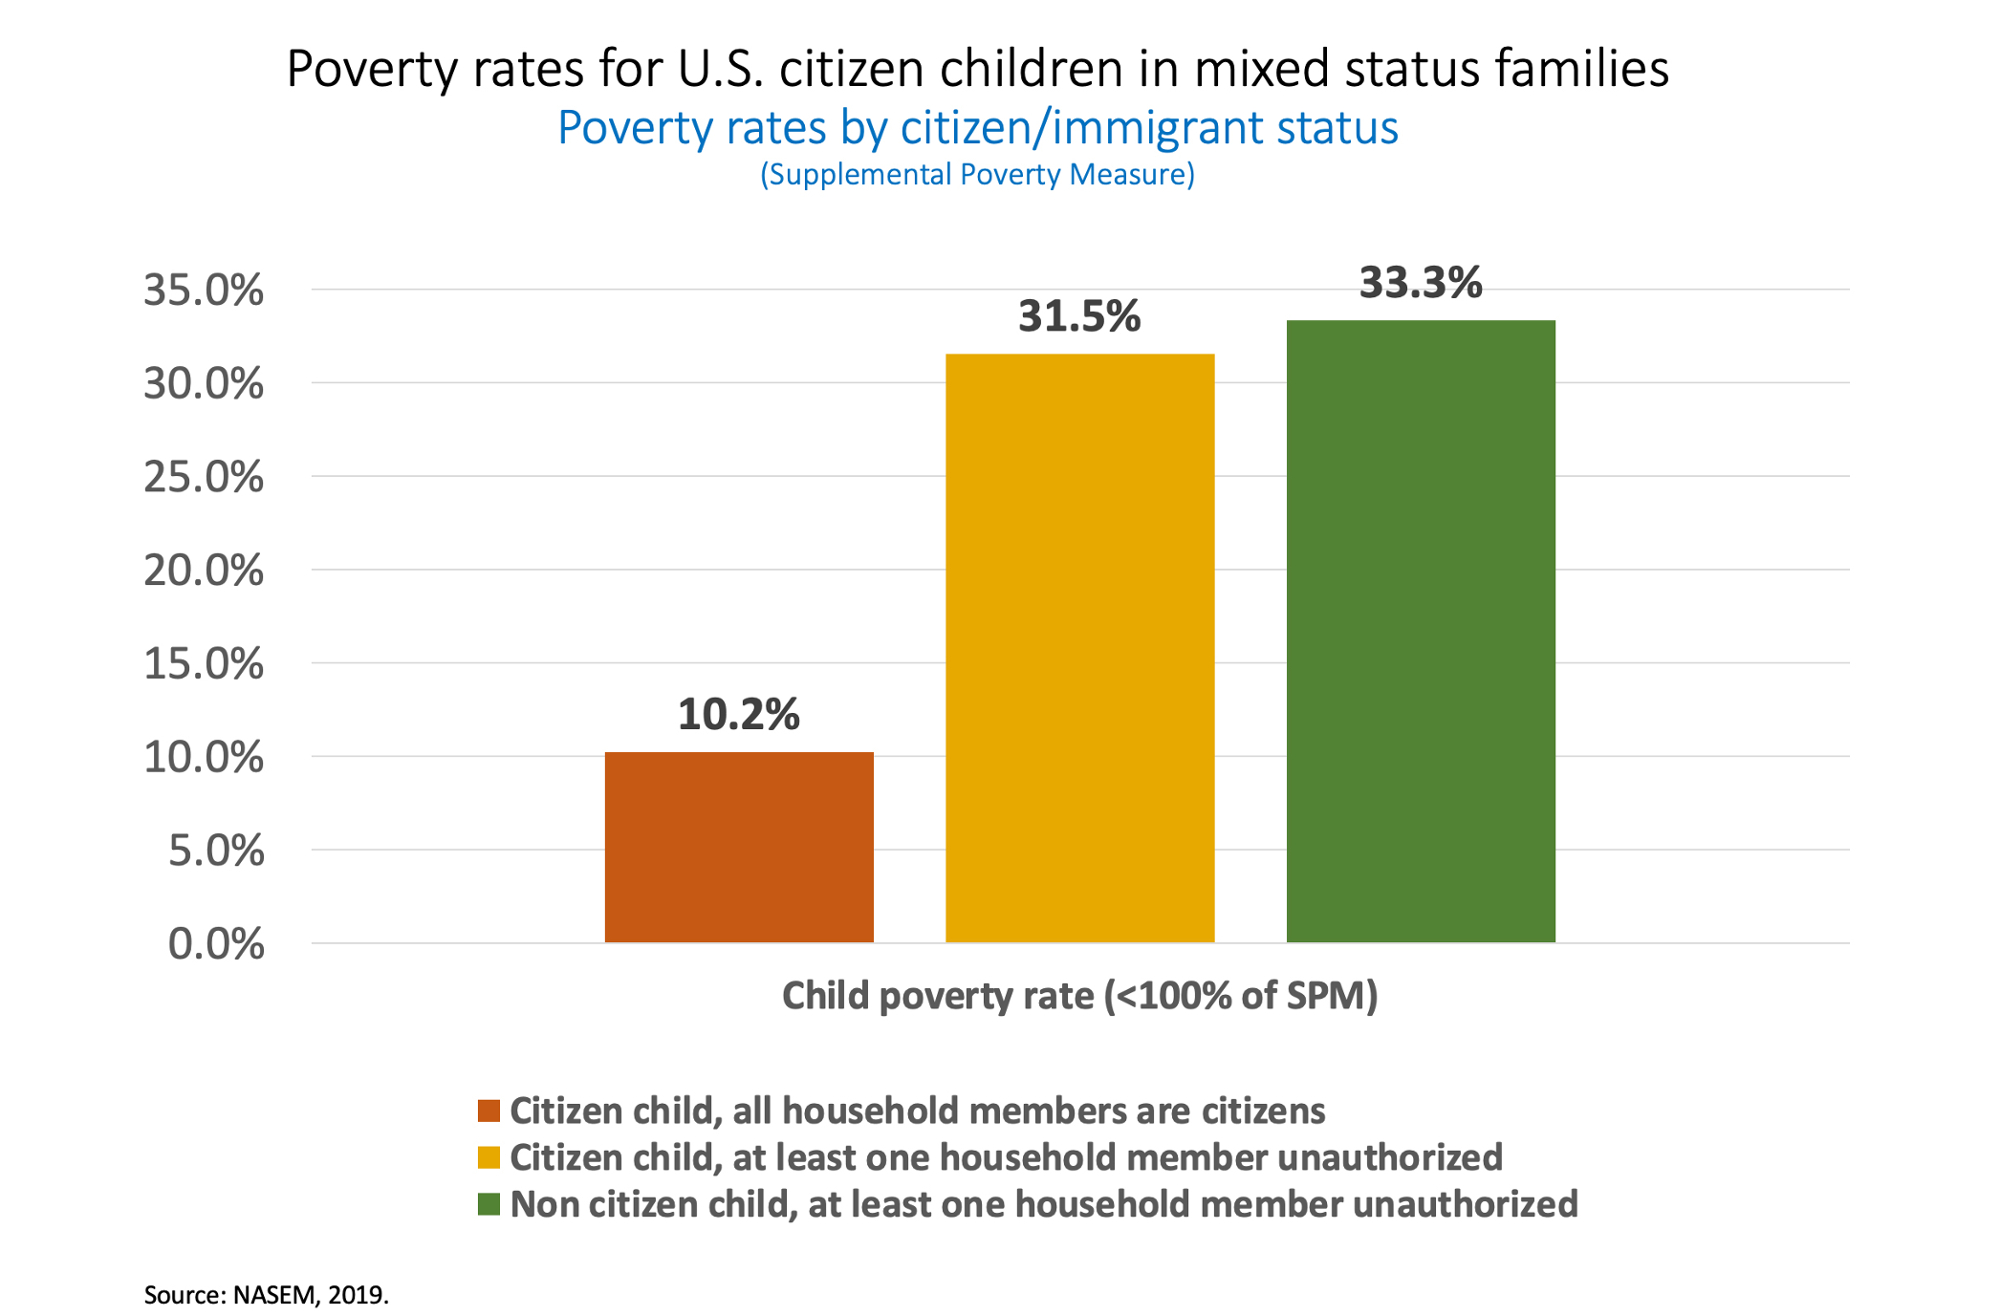 Graph: “Poverty rates for U.S. citizen children in mixed status families.” 10.2% poverty rate for a citizen child in an all-citizen household. 31.5% for a citizen child in household with at least one authorized member. 33.3% for a non citizen child i